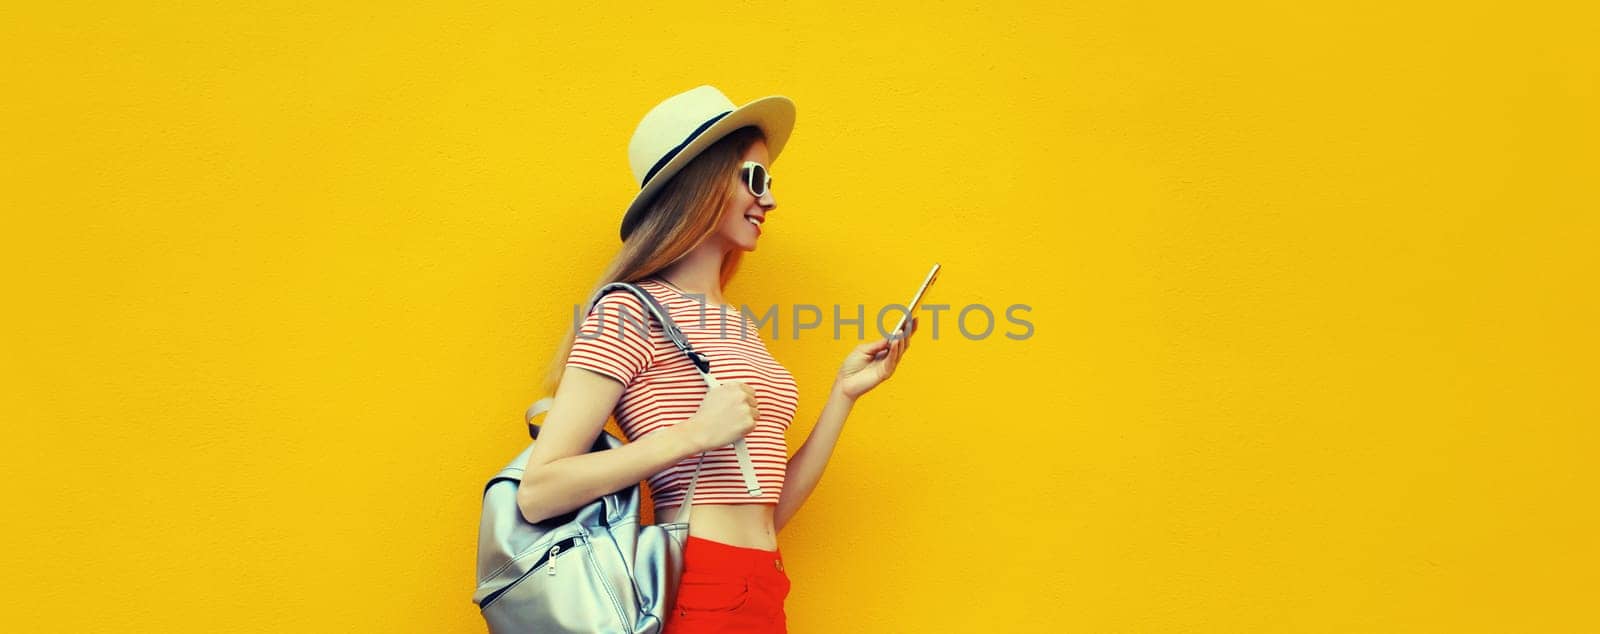 Summer portrait of happy traveler young woman 20s with mobile phone looking at device by Rohappy